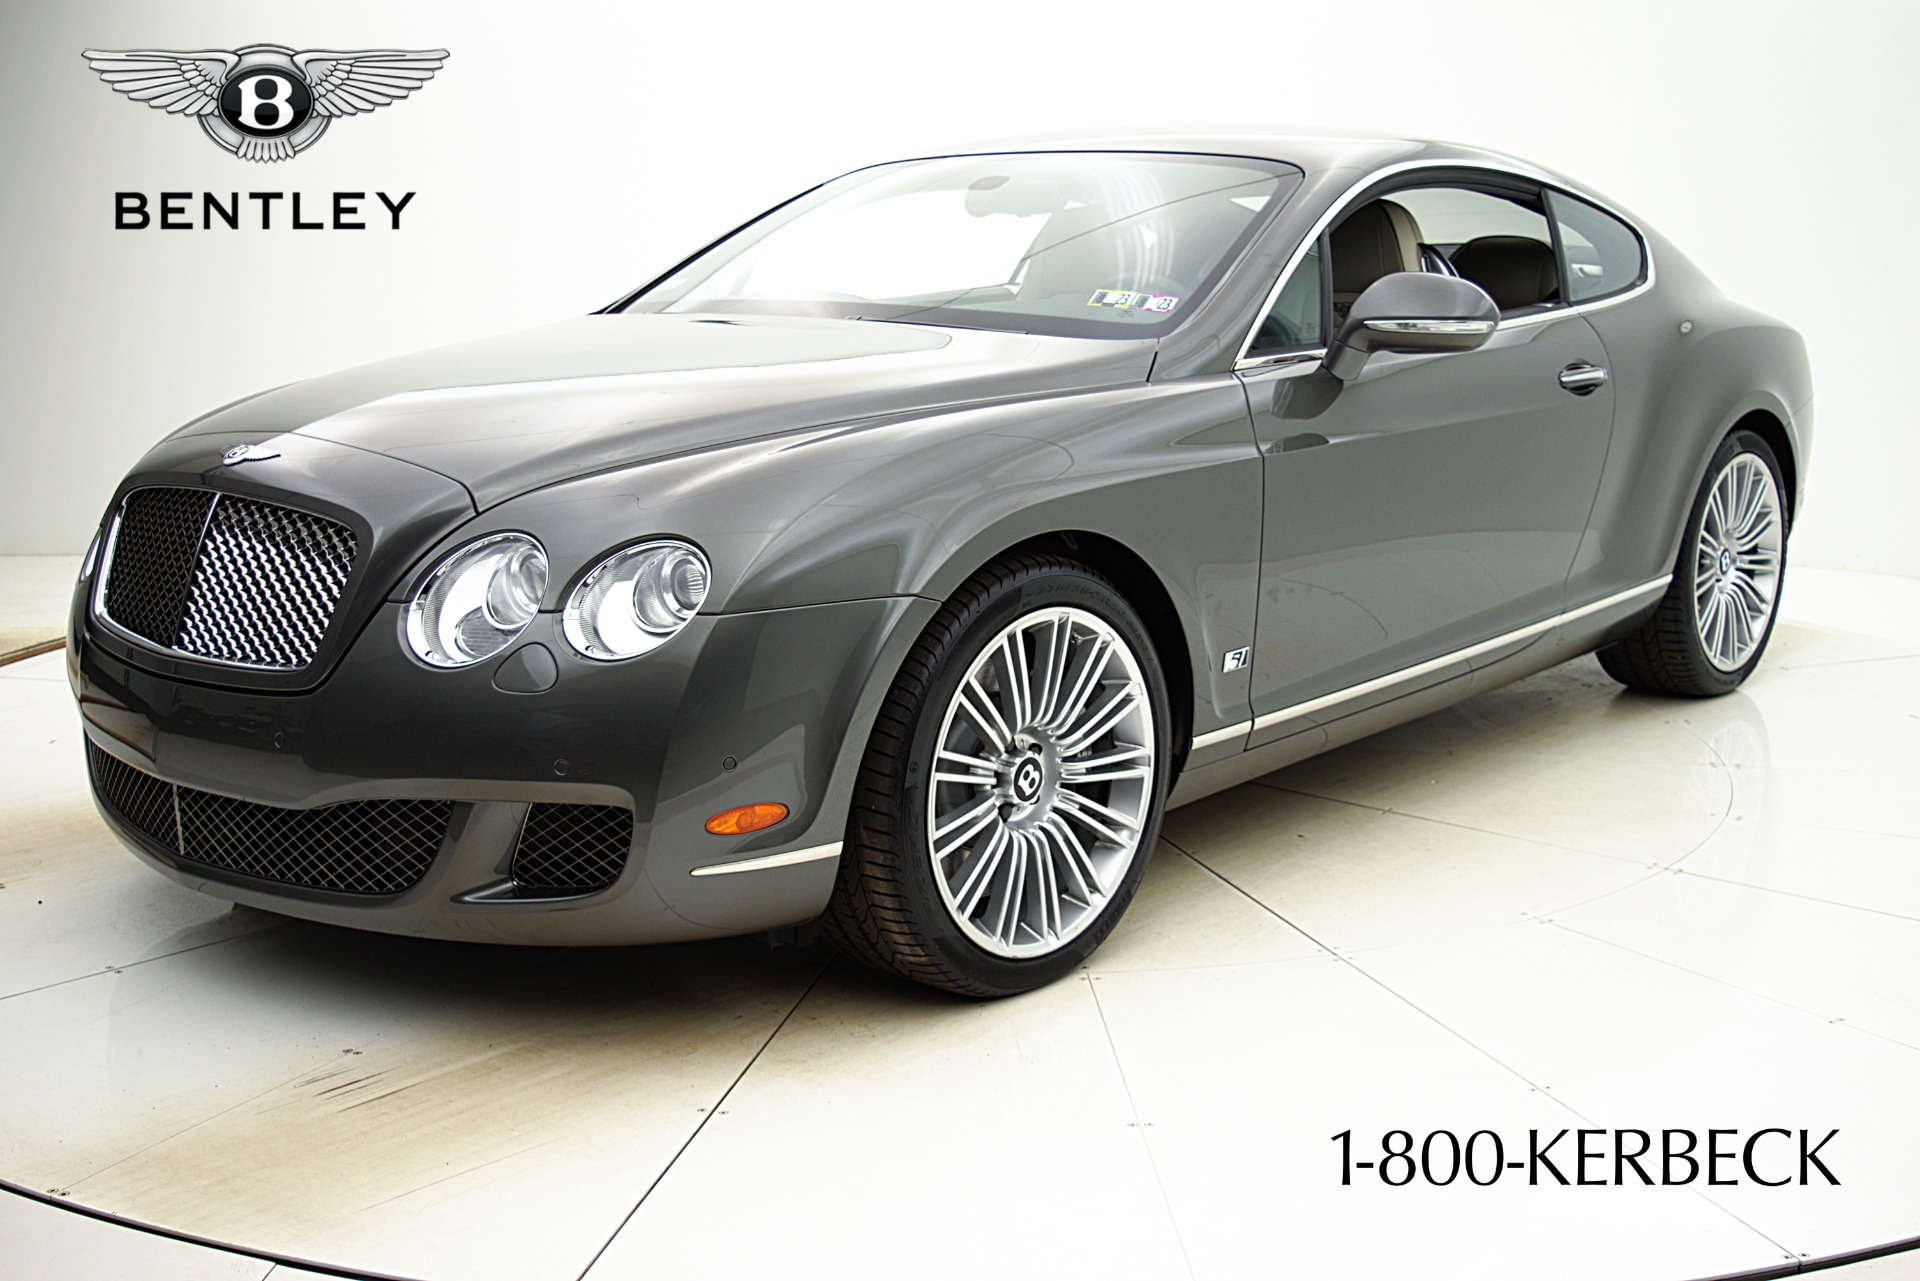 Used 2010 Bentley Continental GT Speed for sale $89,000 at F.C. Kerbeck Aston Martin in Palmyra NJ 08065 2